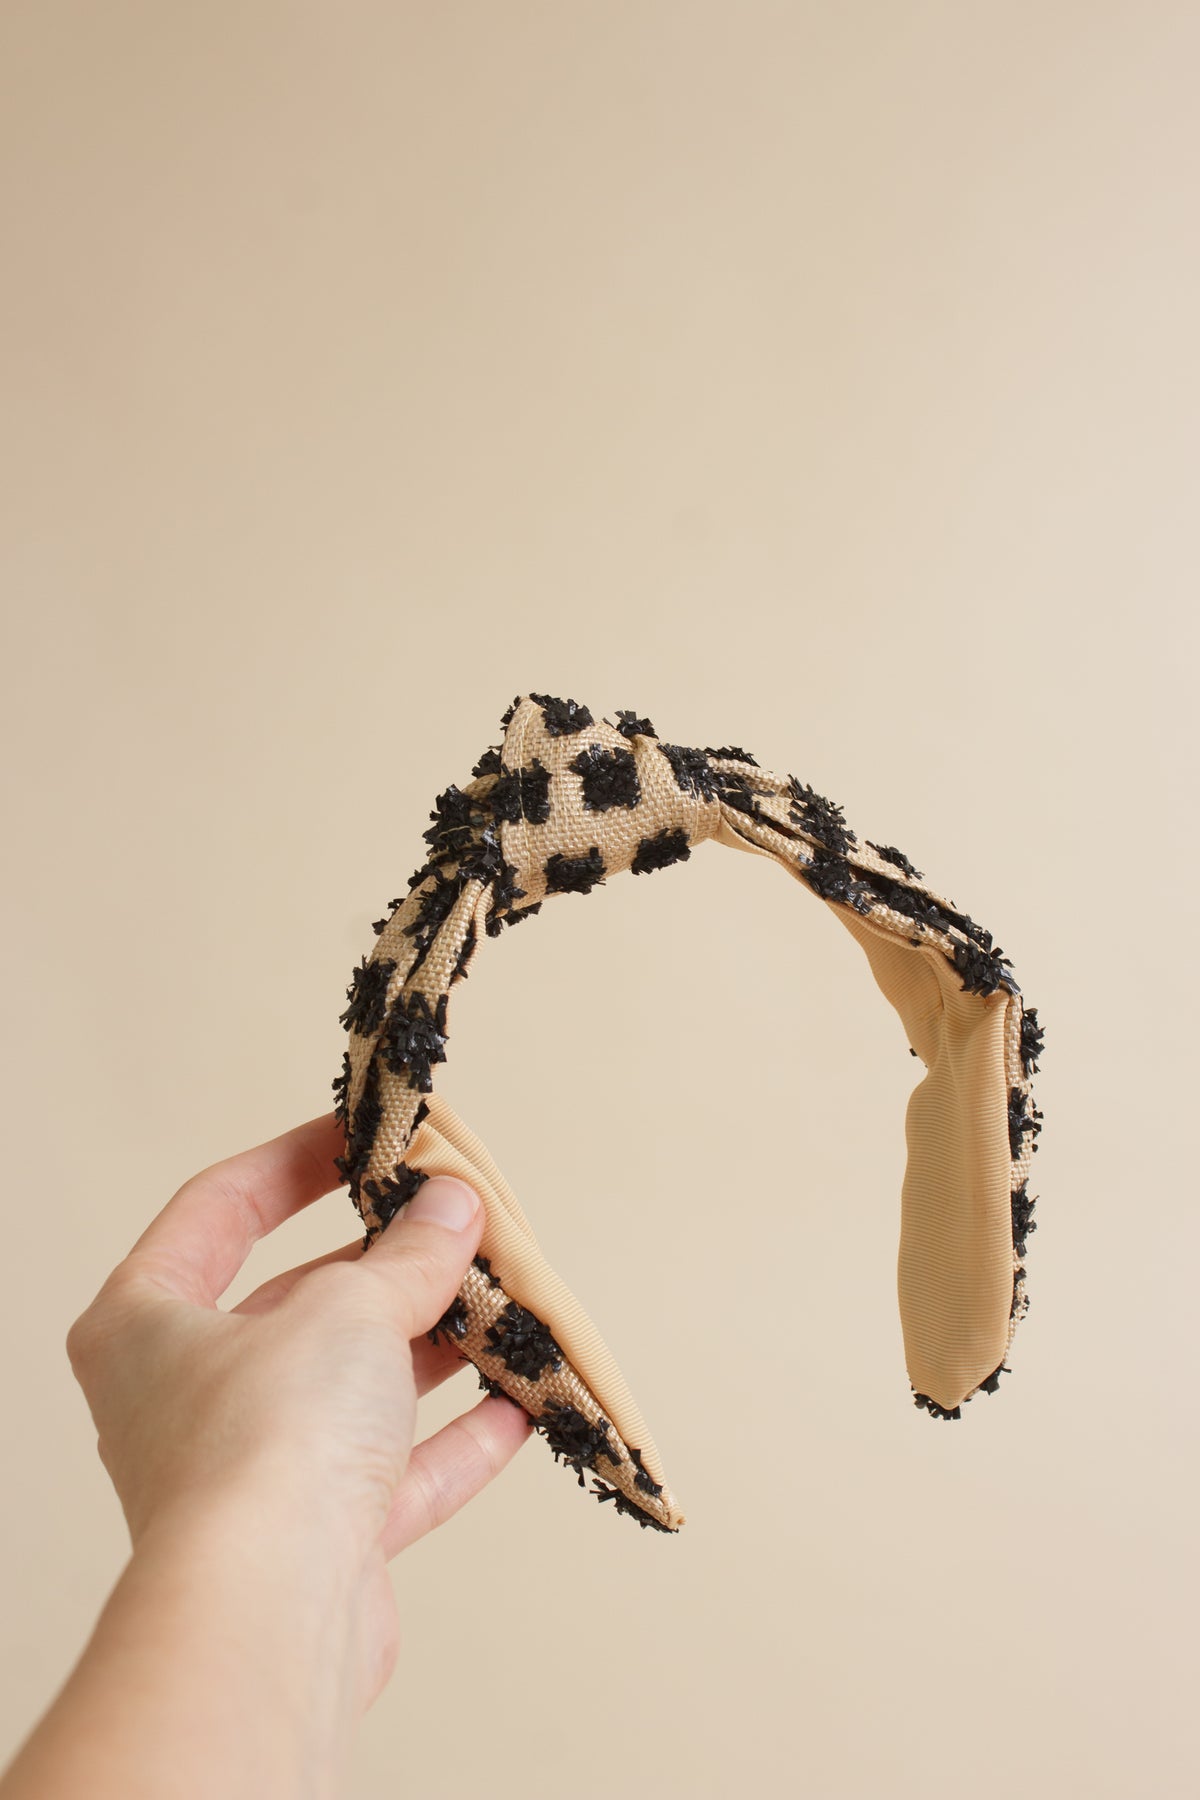 Franklin Sunset woven headband with black textured dots.